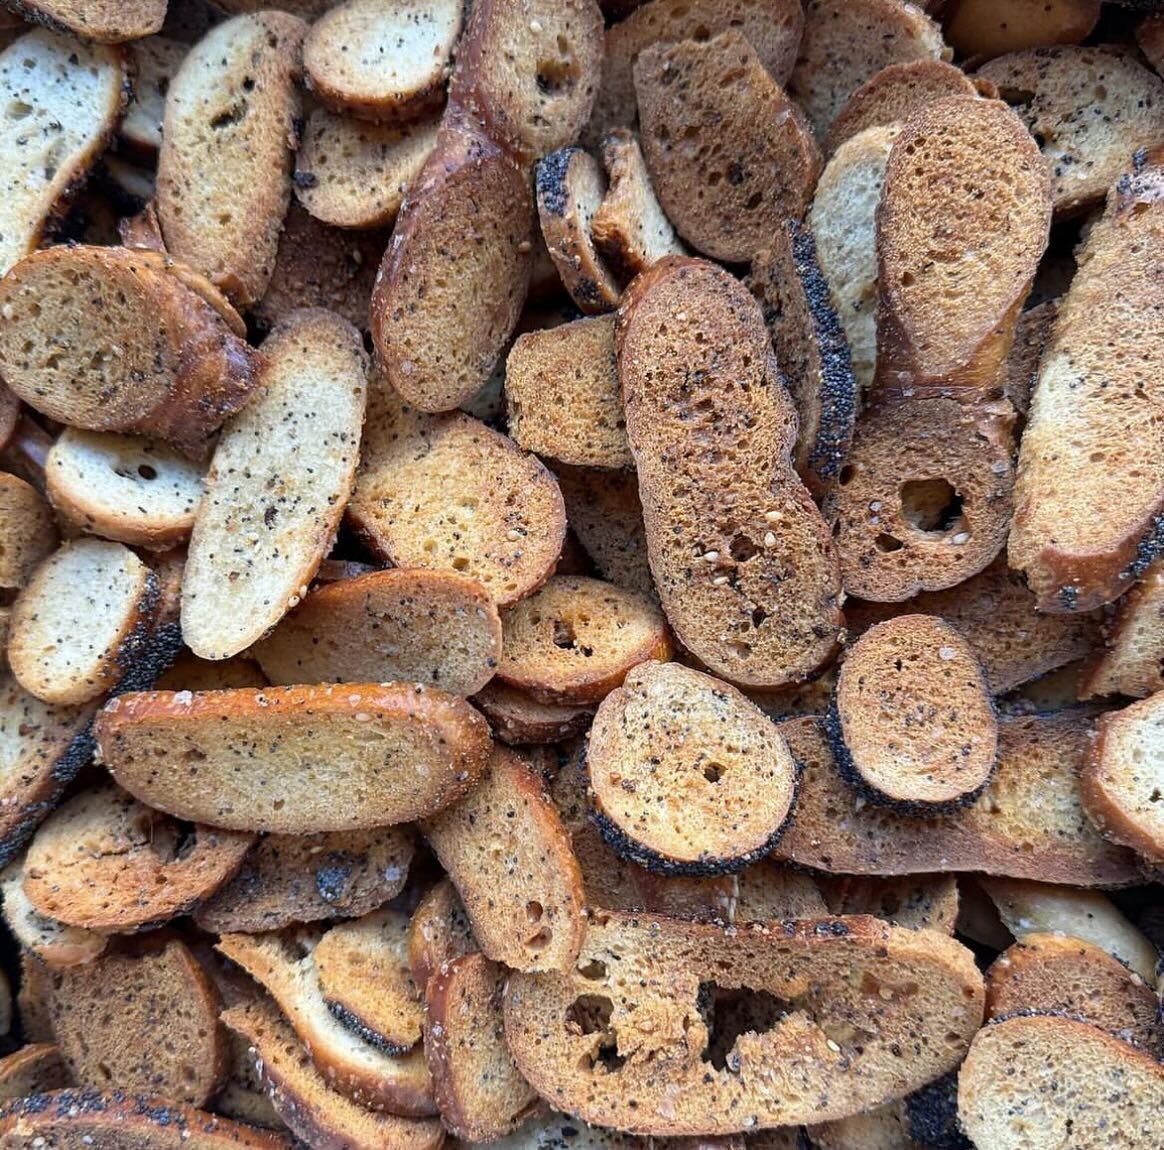 Our bagel chips are popular for good reason. They&rsquo;re made with the same ingredients as our organic bagels, plus a signature mix of seasonings. They&rsquo;re &ldquo;flying off the shelves,&rdquo; according to a wholesale partner. They&rsquo;ve e